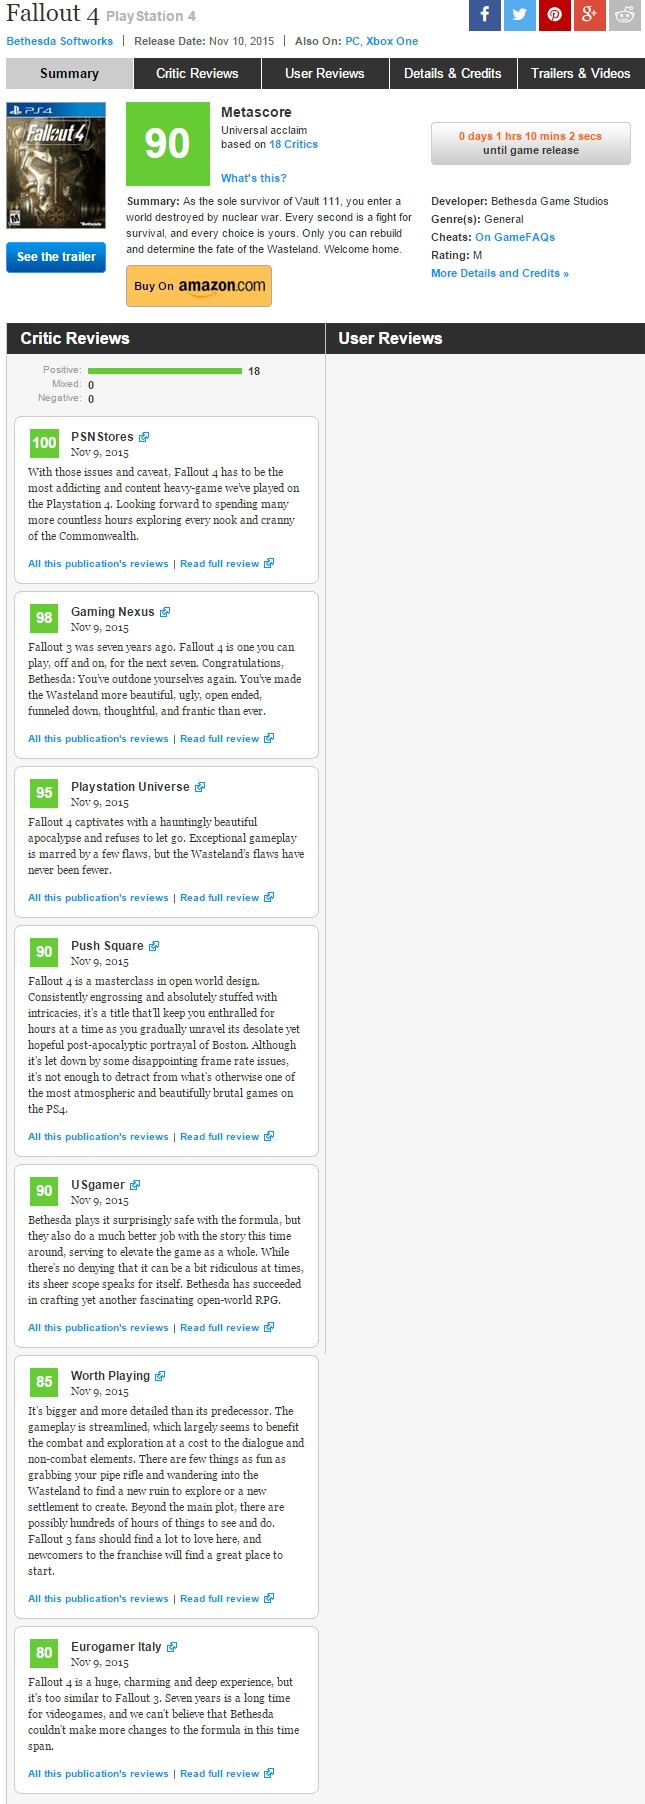 'Fallout 4 for PlayStation 4 Reviews - Metacritic' - www_metacritic_com_game_playstation-4_fallout-4 - 266.jpg